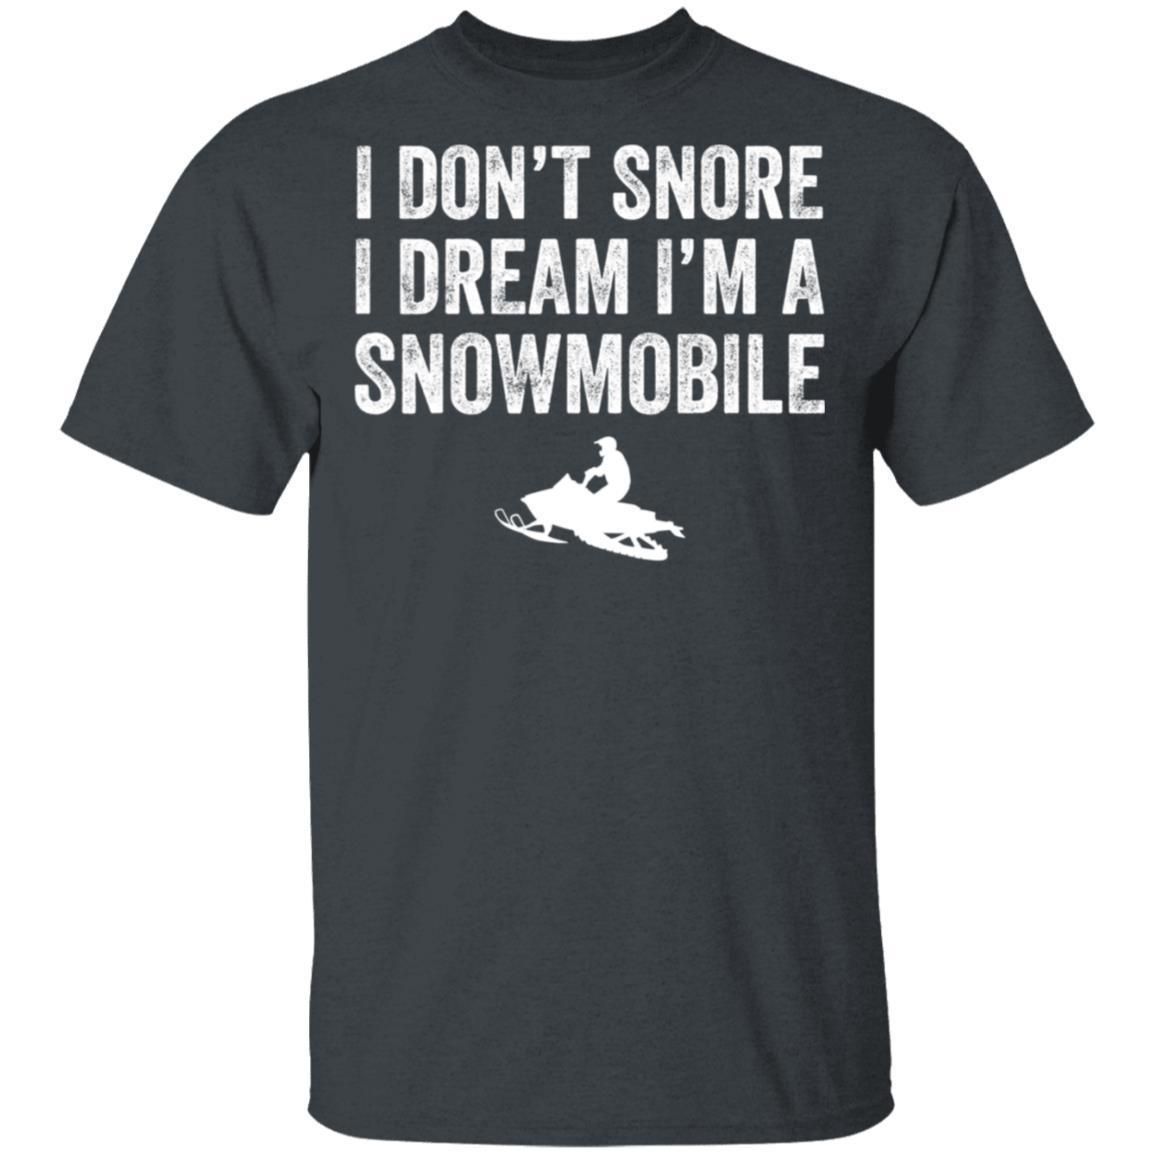 I Don't Snore I Dream I'm a Snowmobile Shirts Funny Snoring